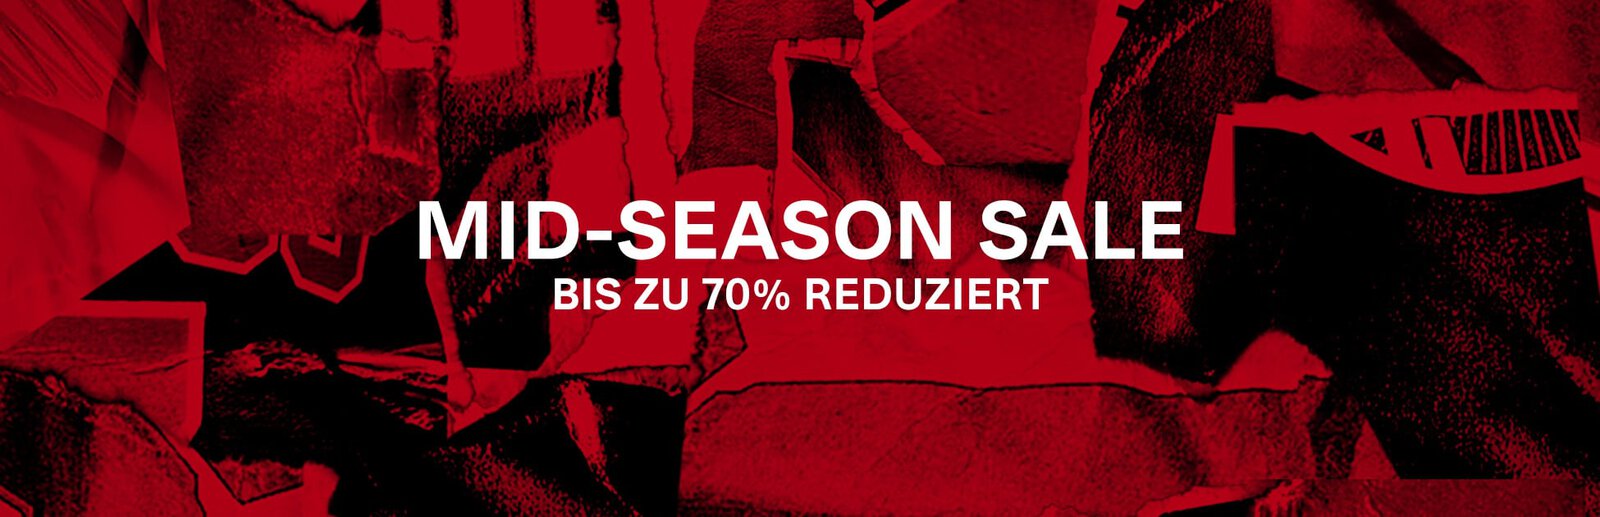 MID-SEASON SALE - UP TO 70% OFF